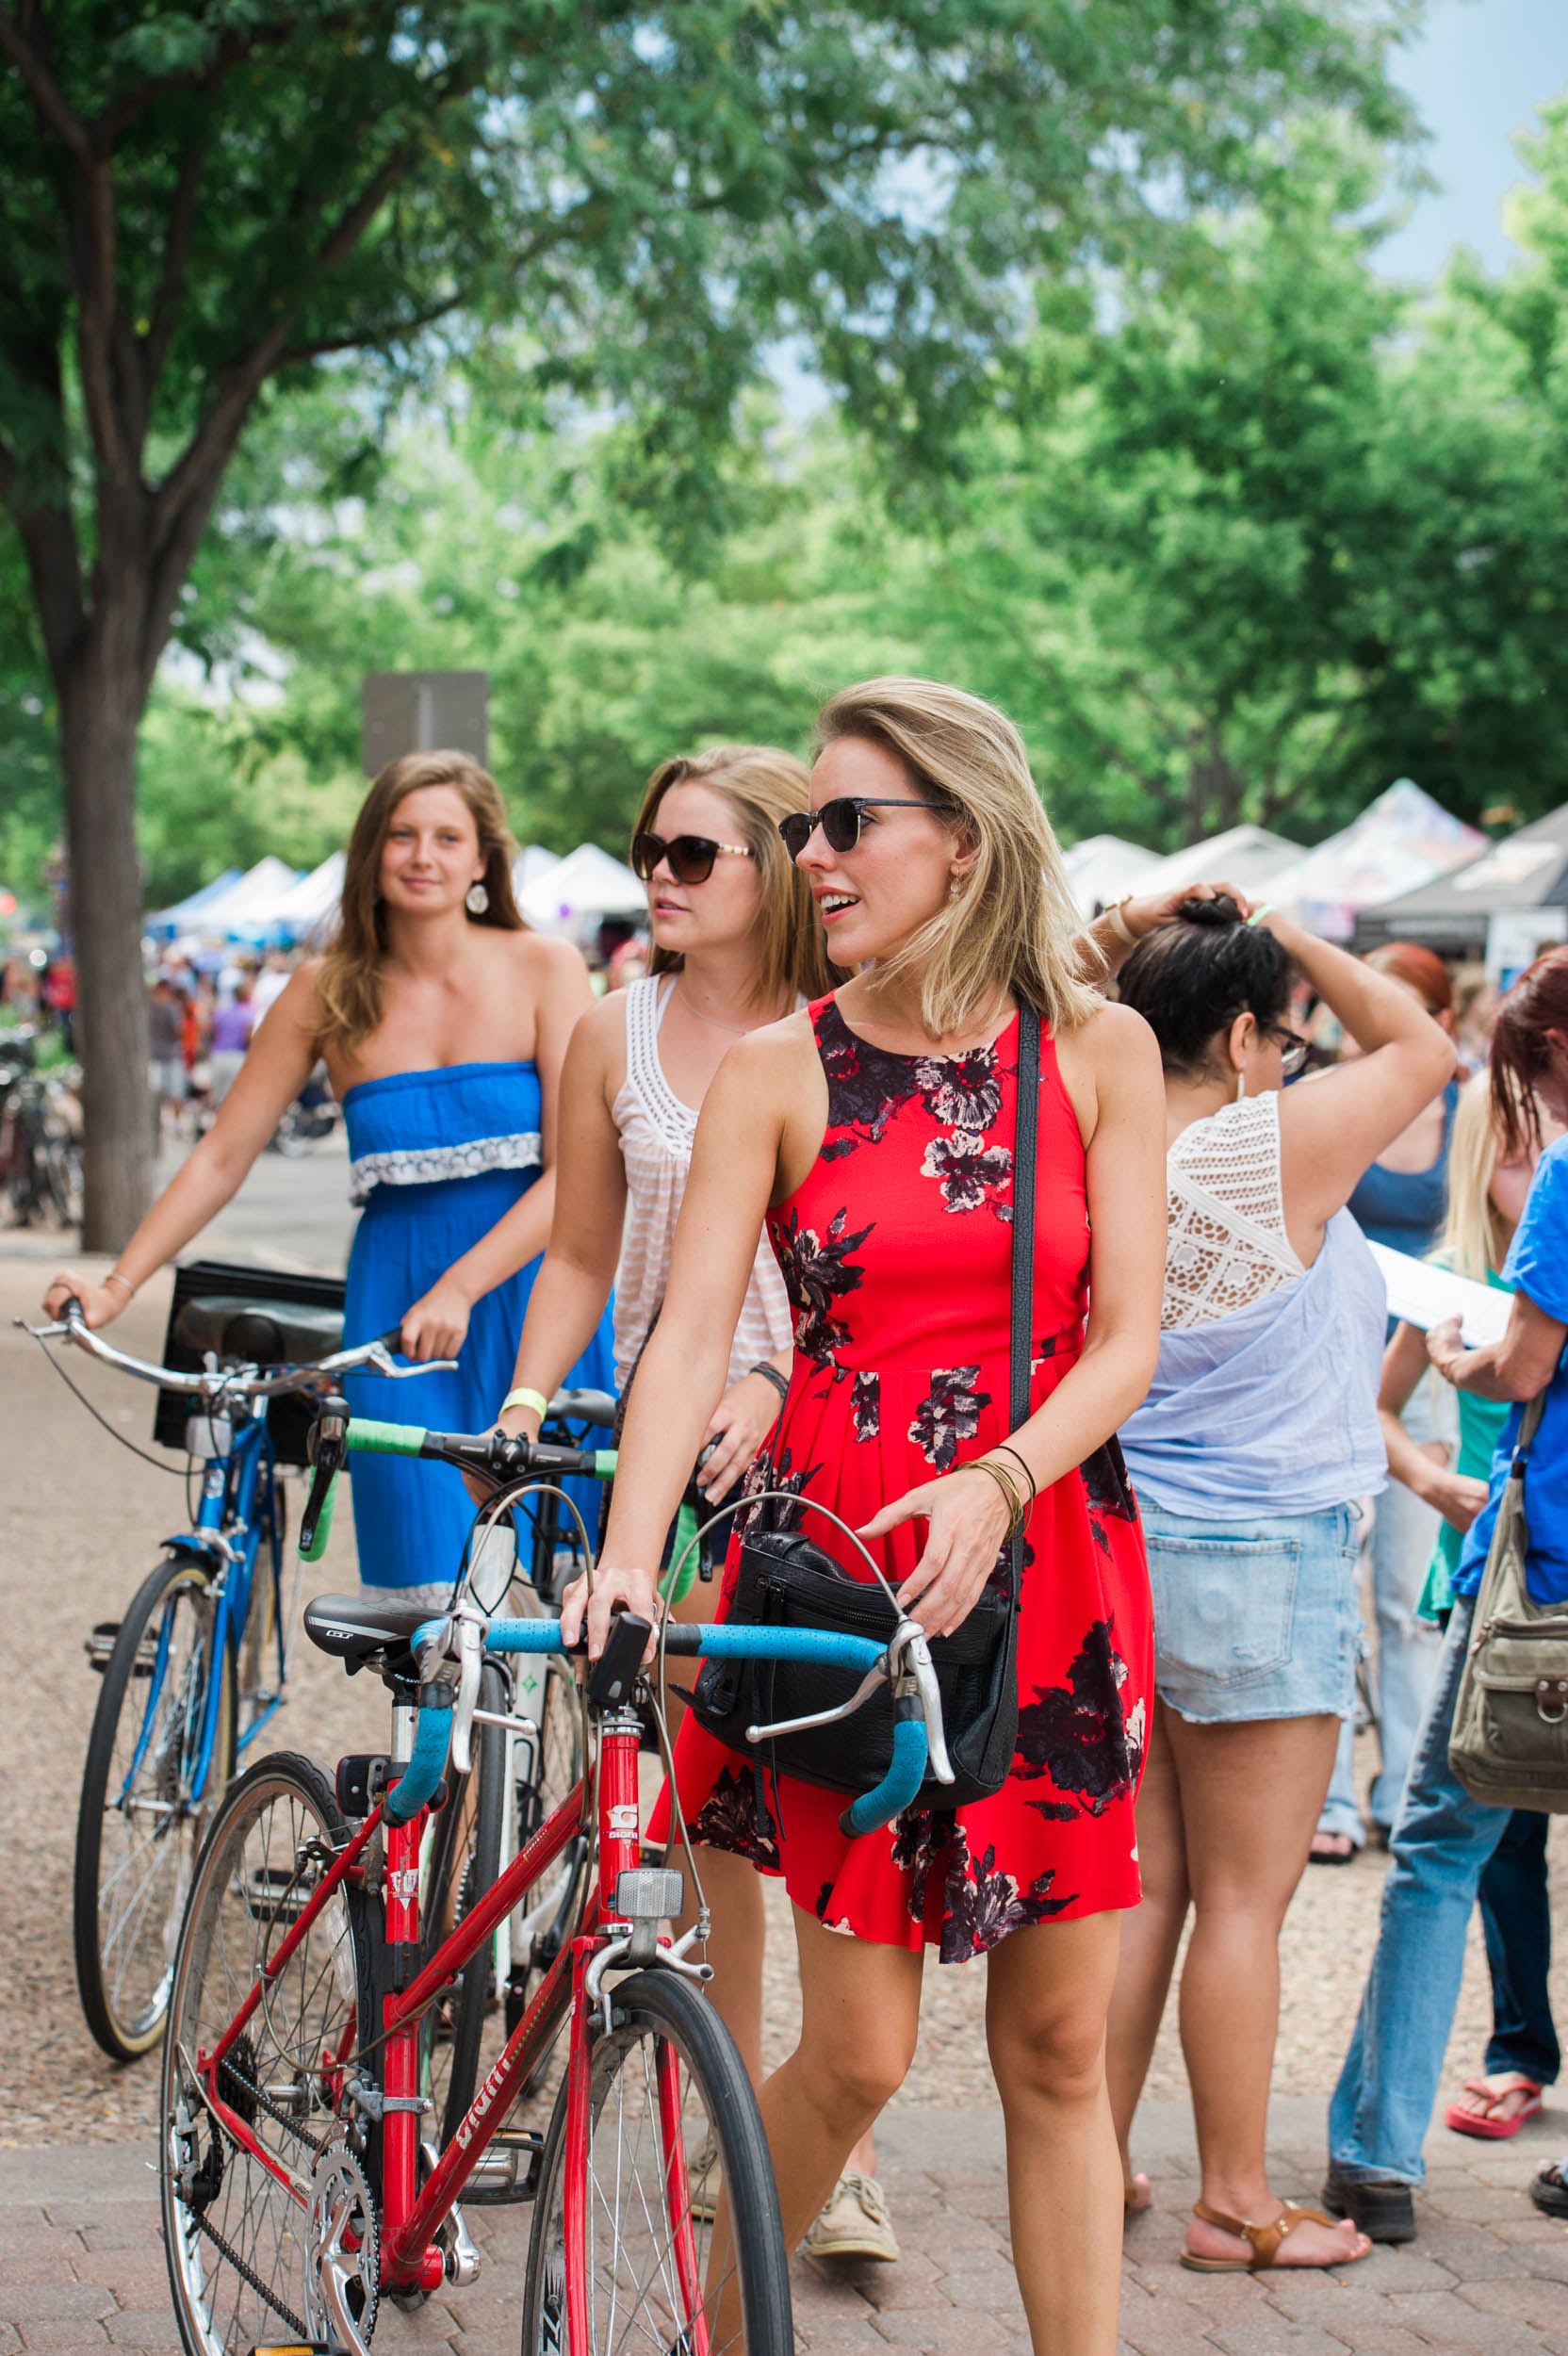  Young women arrive at New West Fest, a music festival in downtown Fort Collins, Colorado 